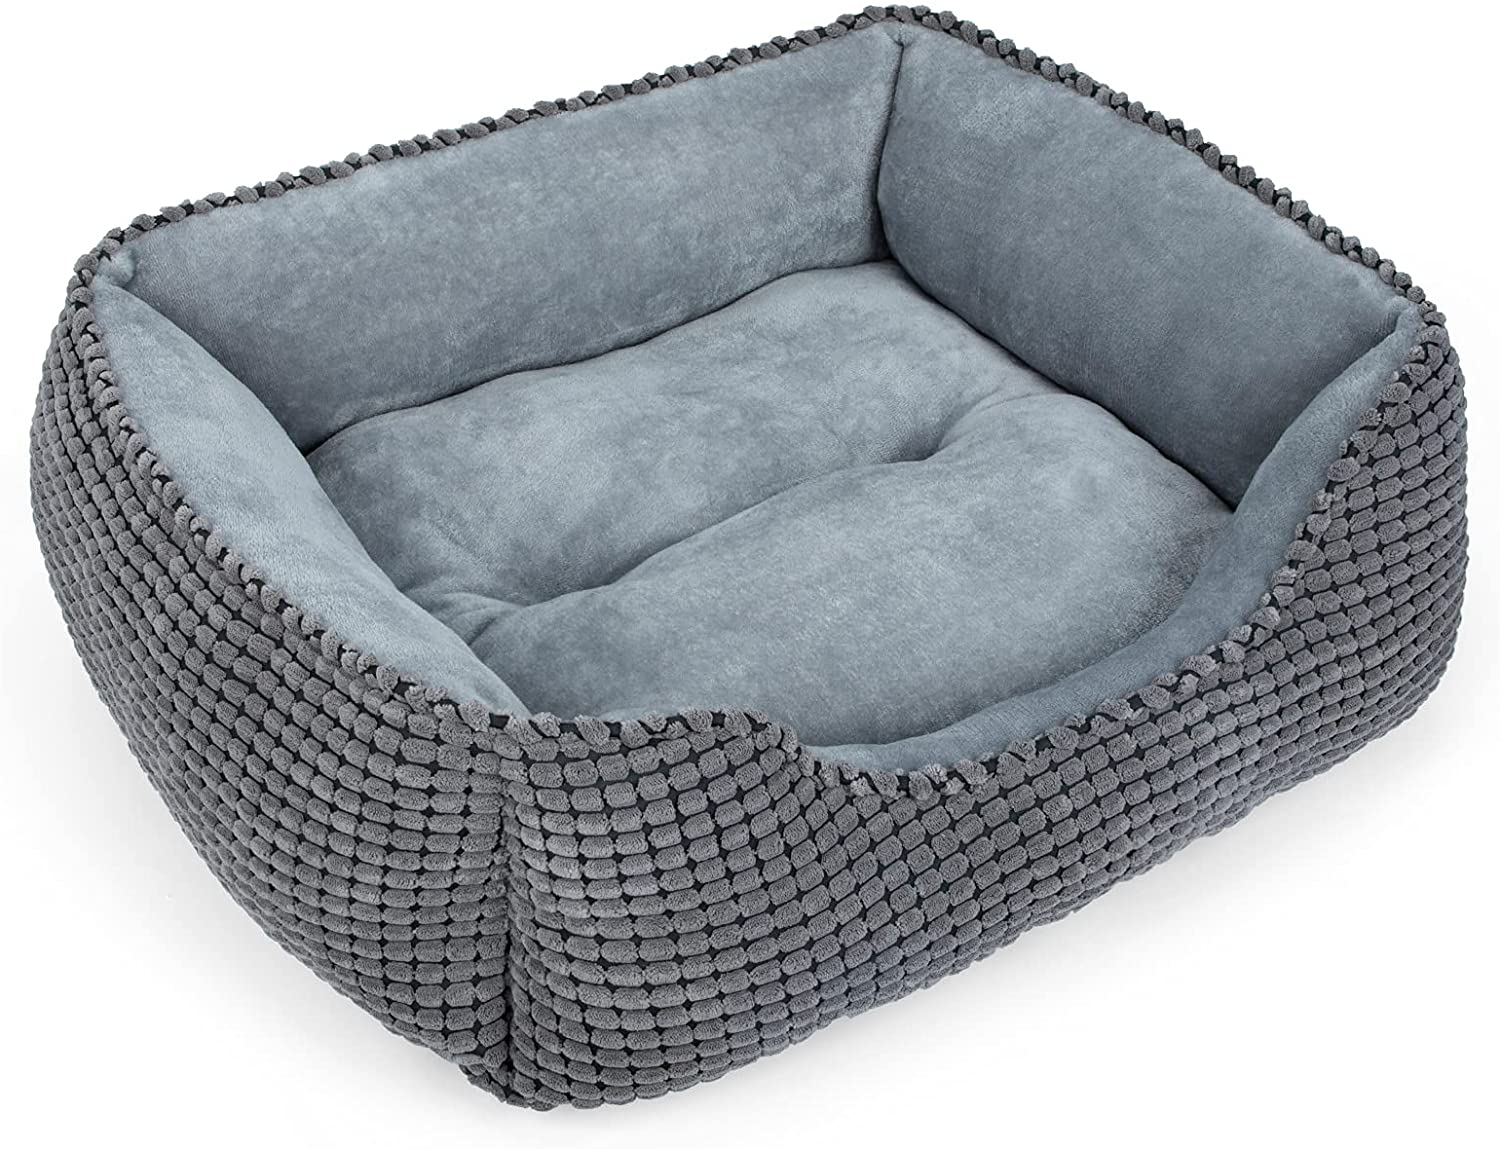 MIXJOY Dog Bed for Large Medium Small Dogs, Rectangle Washable Sleeping Puppy Bed, Orthopedic Pet Sofa Bed, Soft Calming Cat Beds for Indoor Cats, Anti-Slip Bottom with Multiple Size Animals & Pet Supplies > Pet Supplies > Dog Supplies > Dog Beds MIXJOY Grey S(20’’x 19’’x 6’’) 